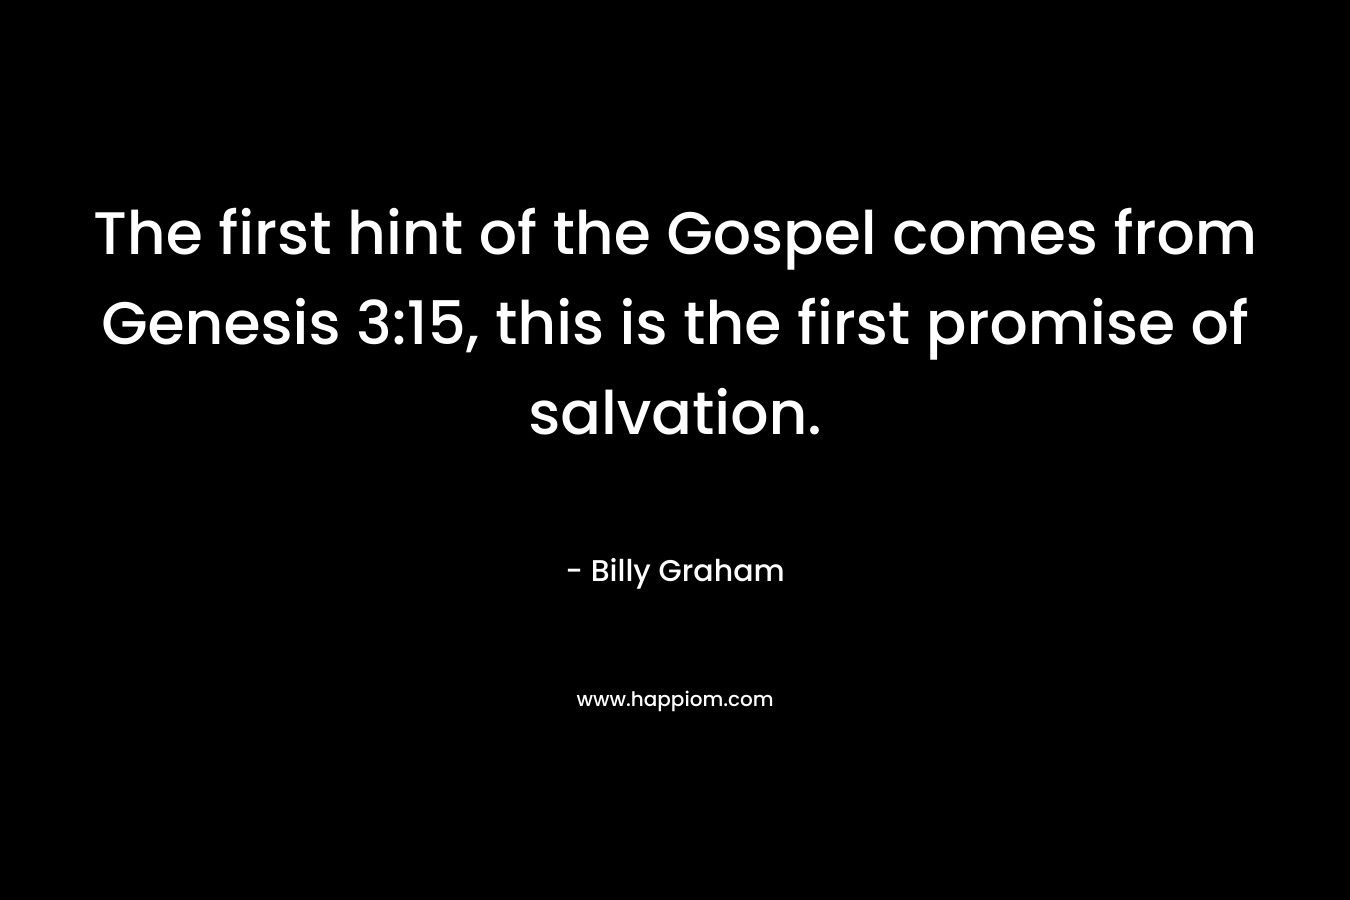 The first hint of the Gospel comes from Genesis 3:15, this is the first promise of salvation. – Billy Graham